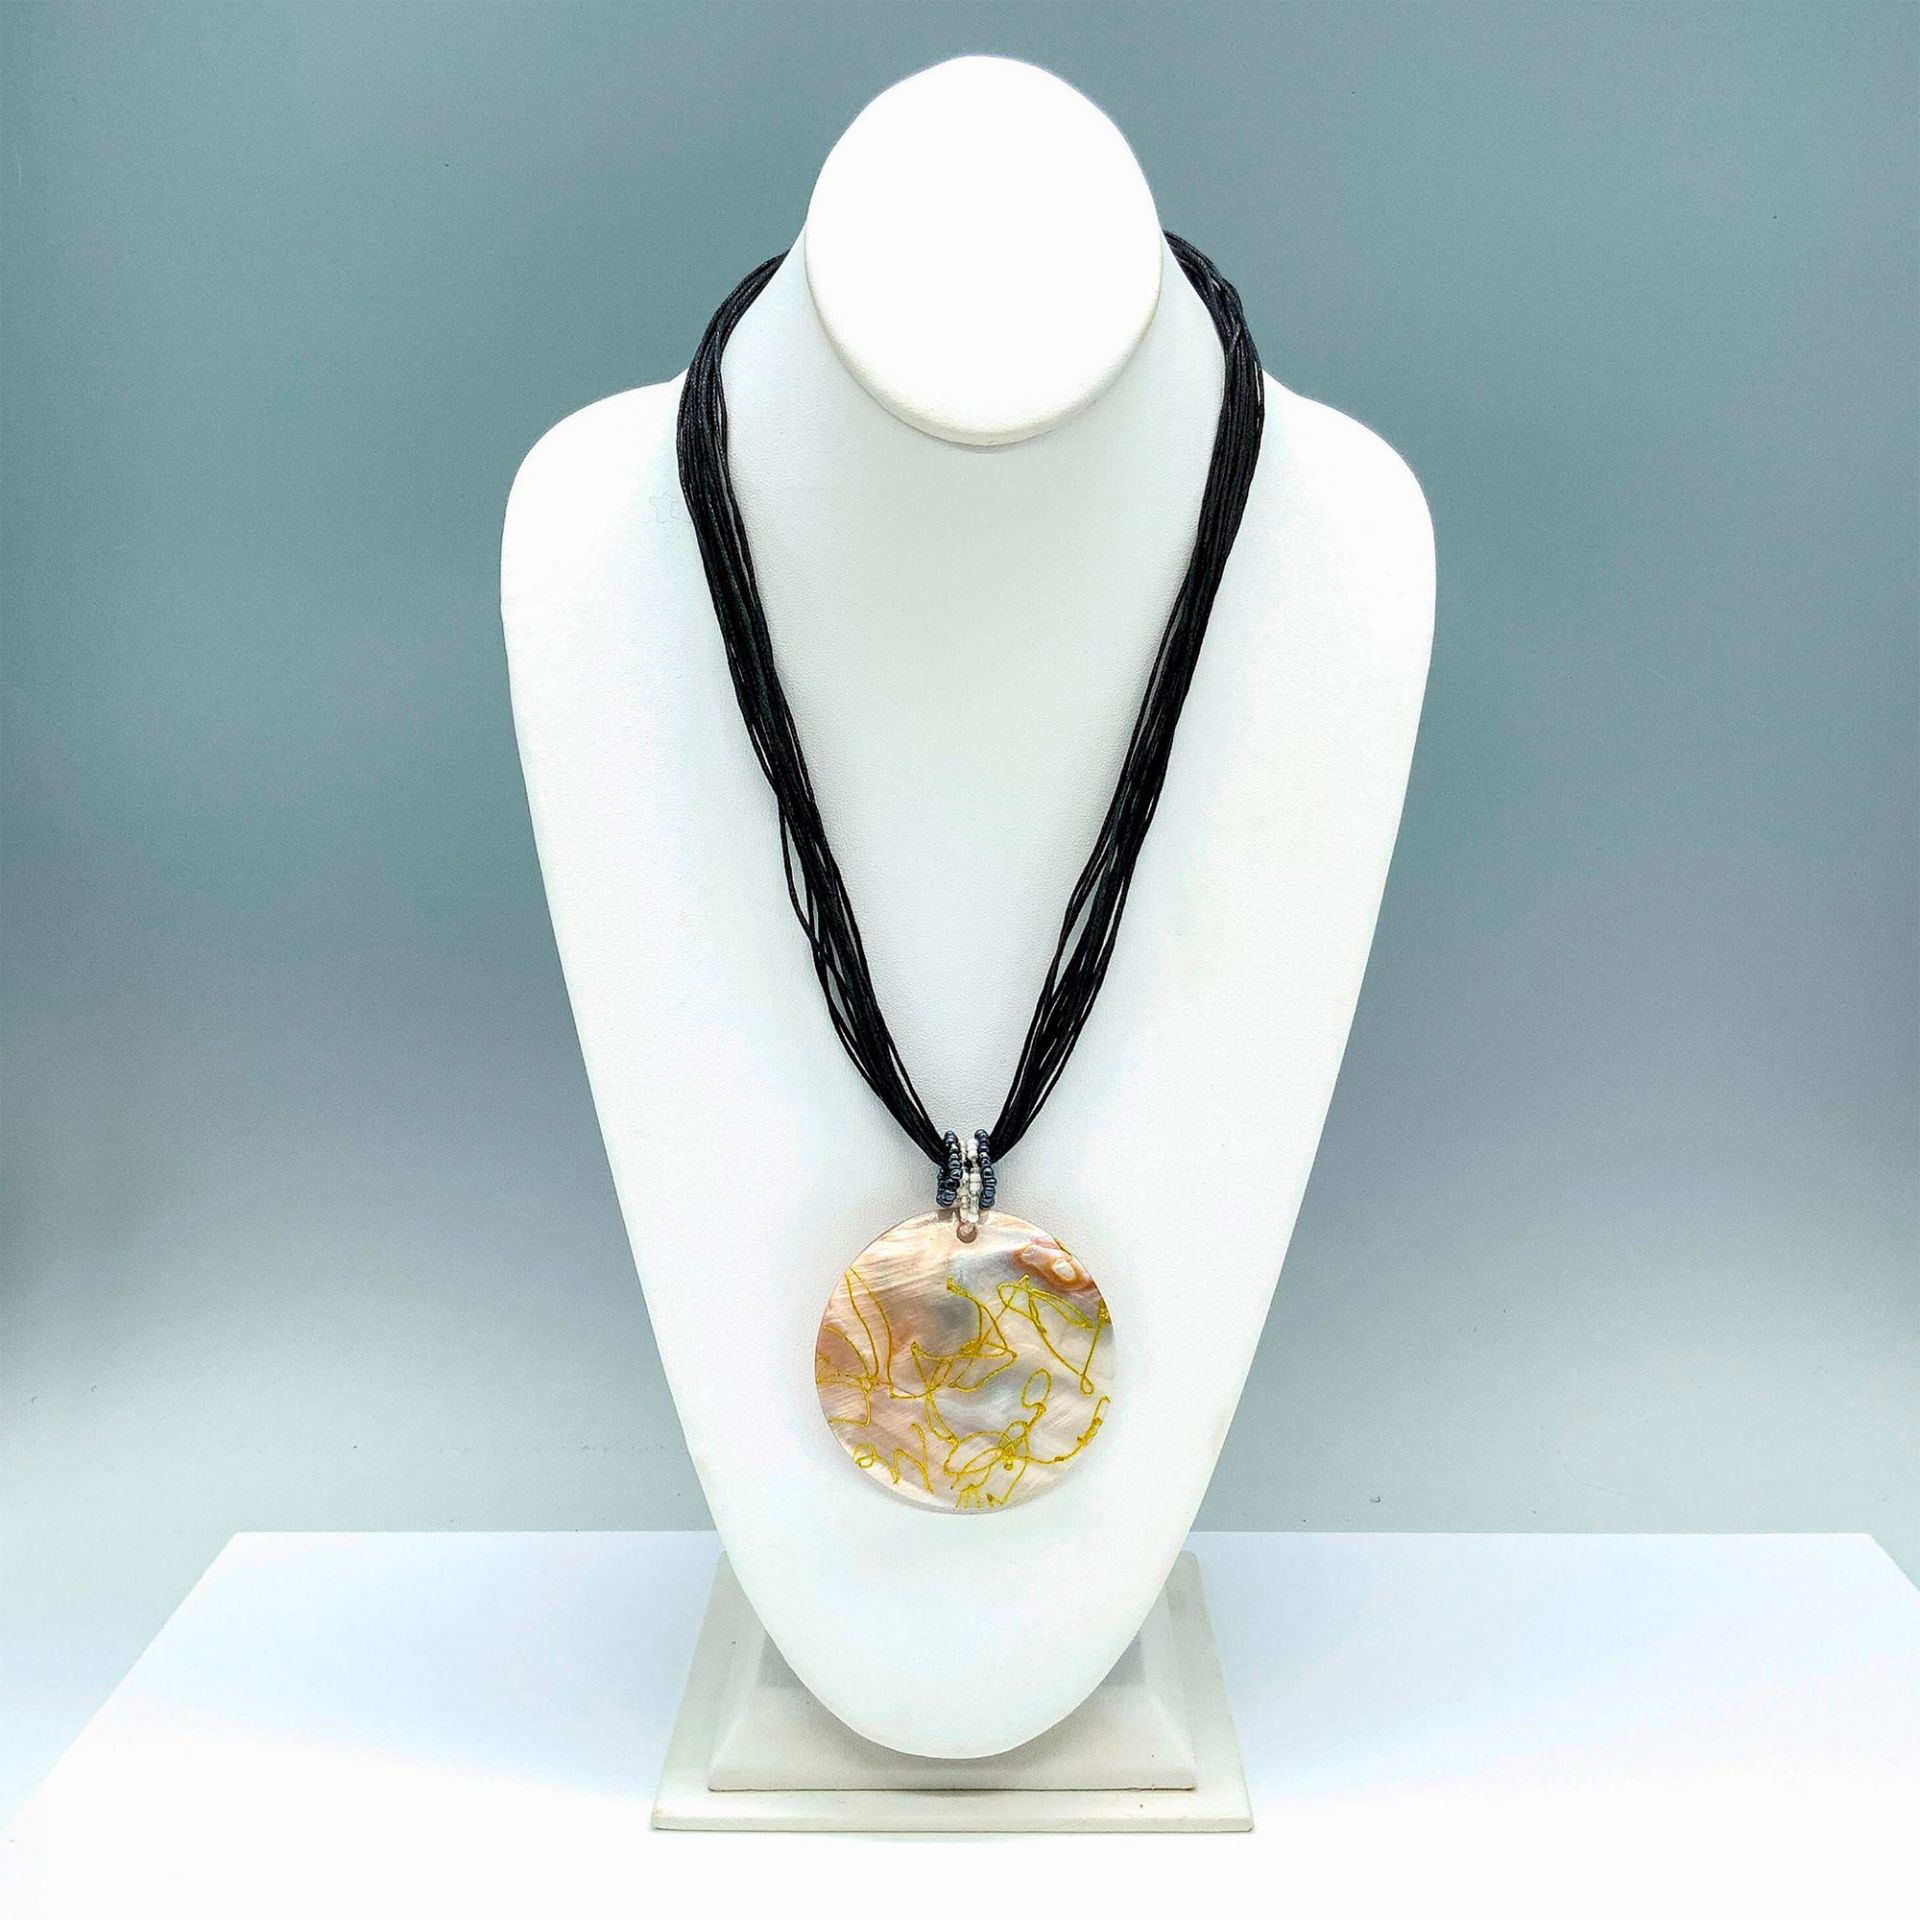 Hand-Painted Mother Of Pearl Medallion Pendant Necklace - Image 2 of 3